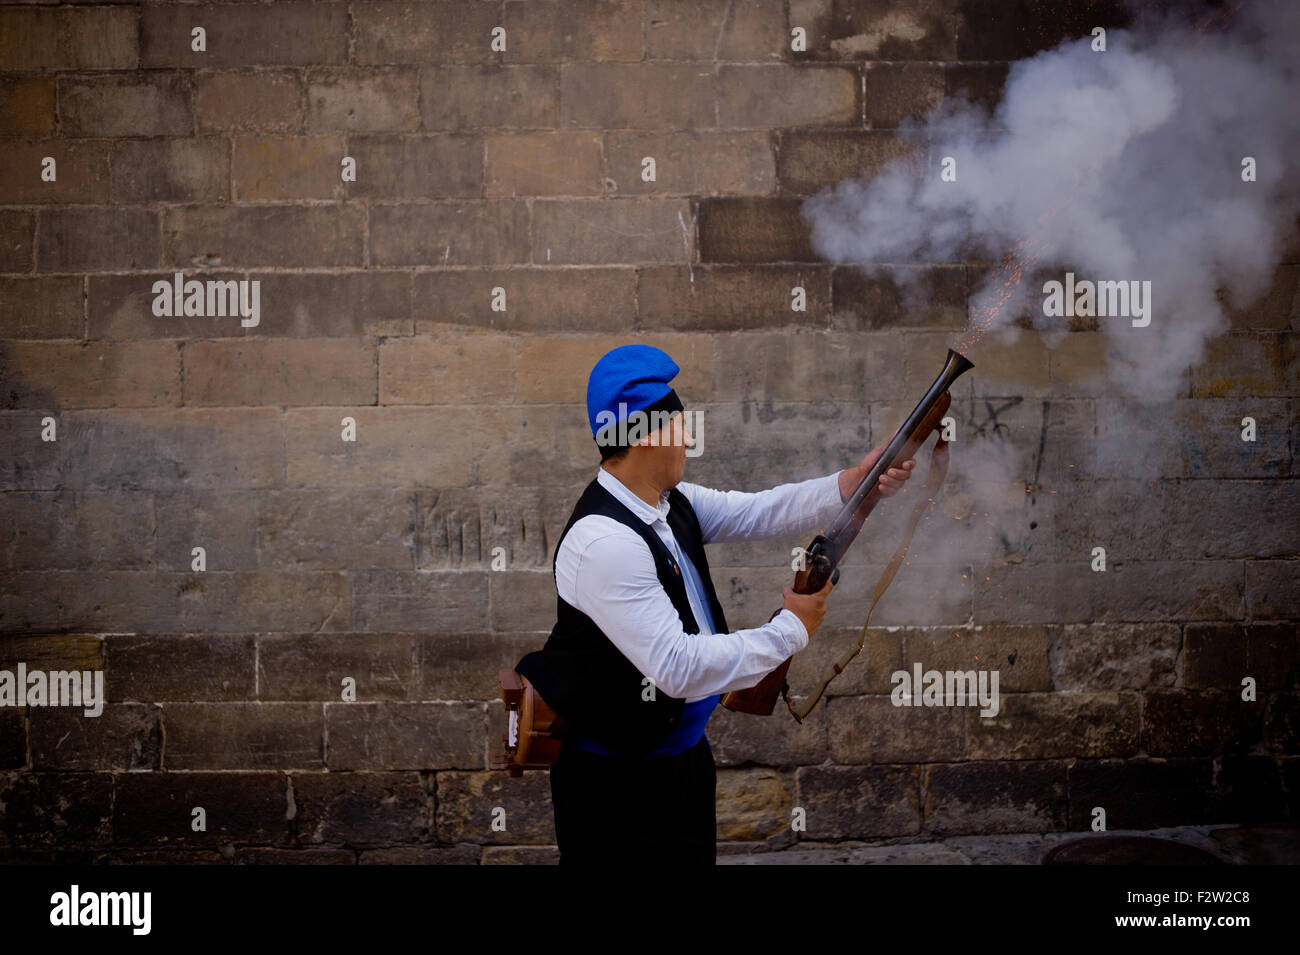 Barcelona, Catalonia, Spain. 24th Sep, 2015. A trabucaire shoots his blunderbuss through the streets of Barcelona on the occasion of the celebrations of the Merce Festival (Festes de la Merce) on 24 September 2015, Spain. The Galejada Trabucairemarks the beginning of the day of the patron saint of Barcelona, La Merce. Men and women dressed as ancient Catalan bandits take to the streets of the old part of Barcelona and cause a loud noise with his blunderbusses full of gunpowder. © Jordi Boixareu/ZUMA Wire/Alamy Live News Stock Photo